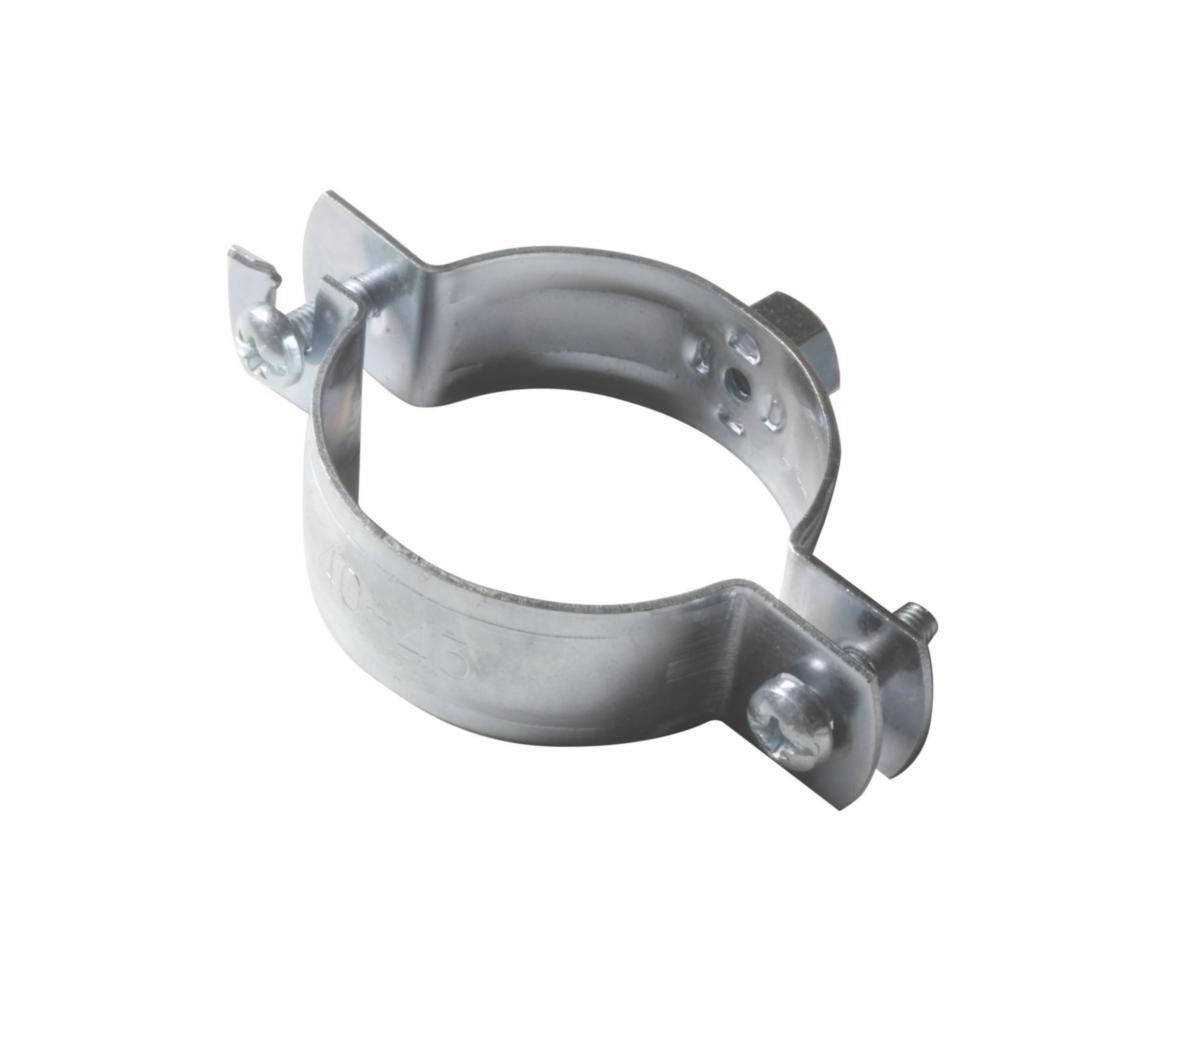 Iron clamp exhaust clamp pipe clamp exhaust pipe M10 x Ø 56 mm